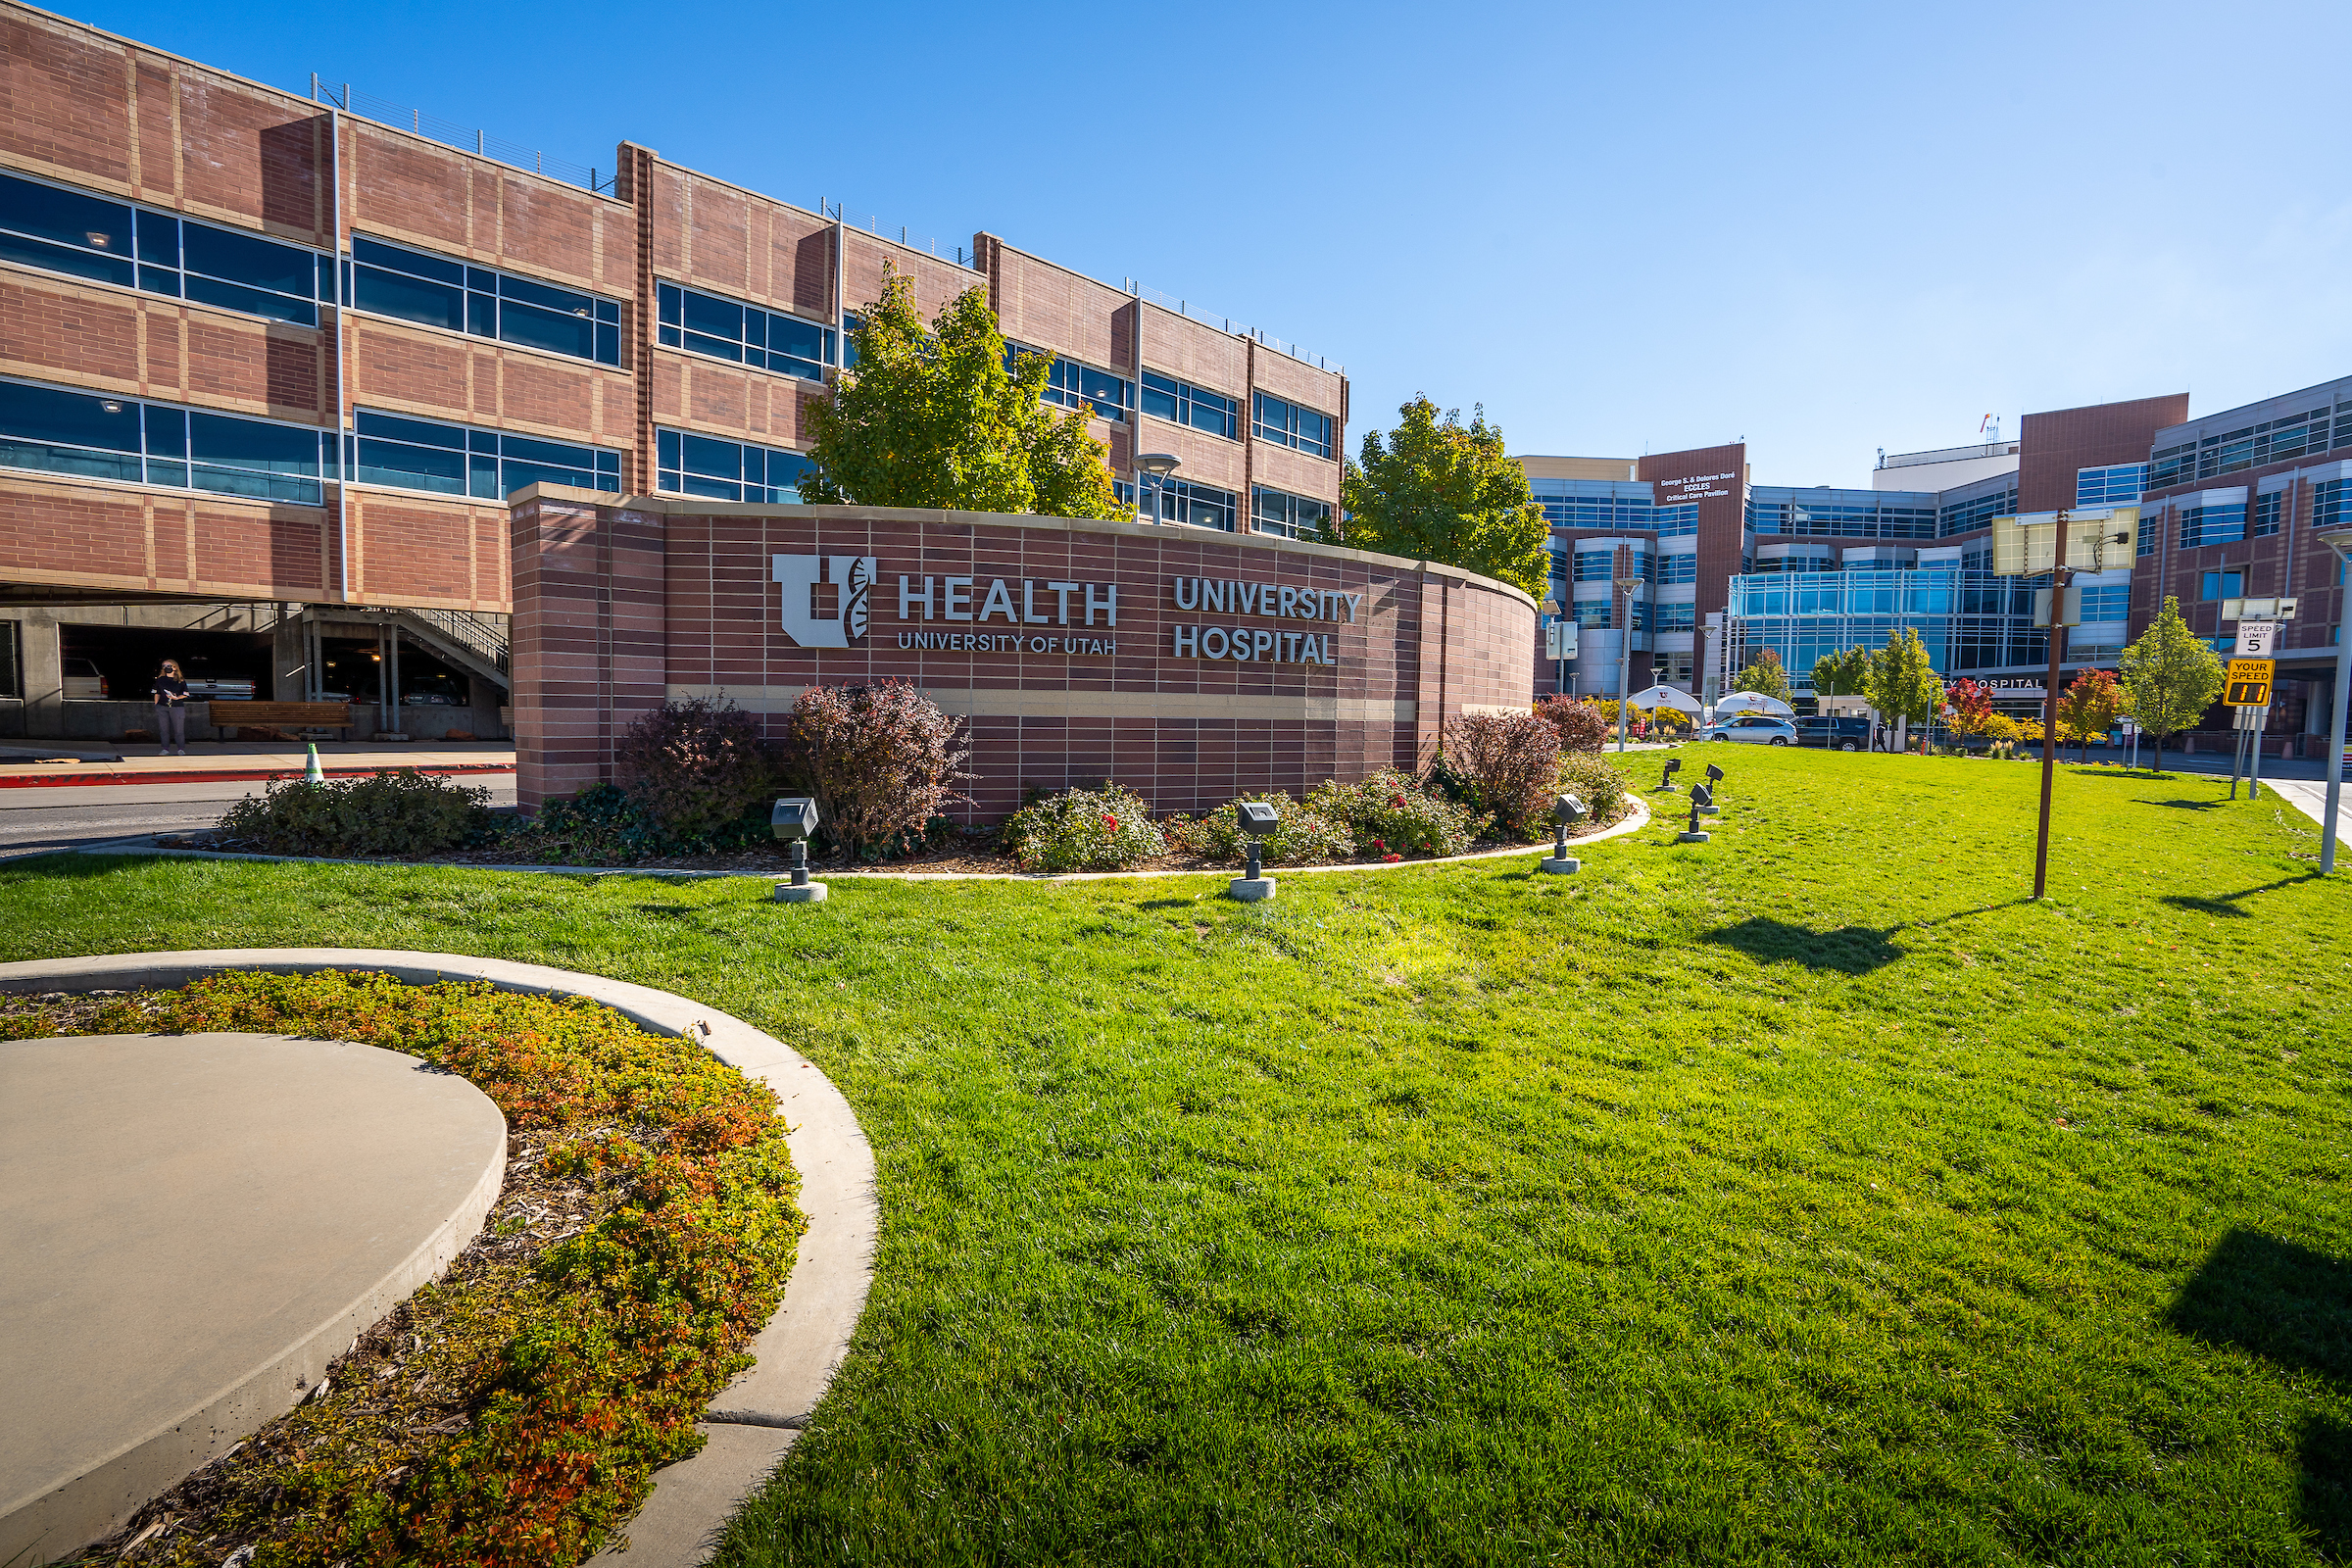 An image of the exterior of the University of Utah Health University Hospital exterior and entrance signage